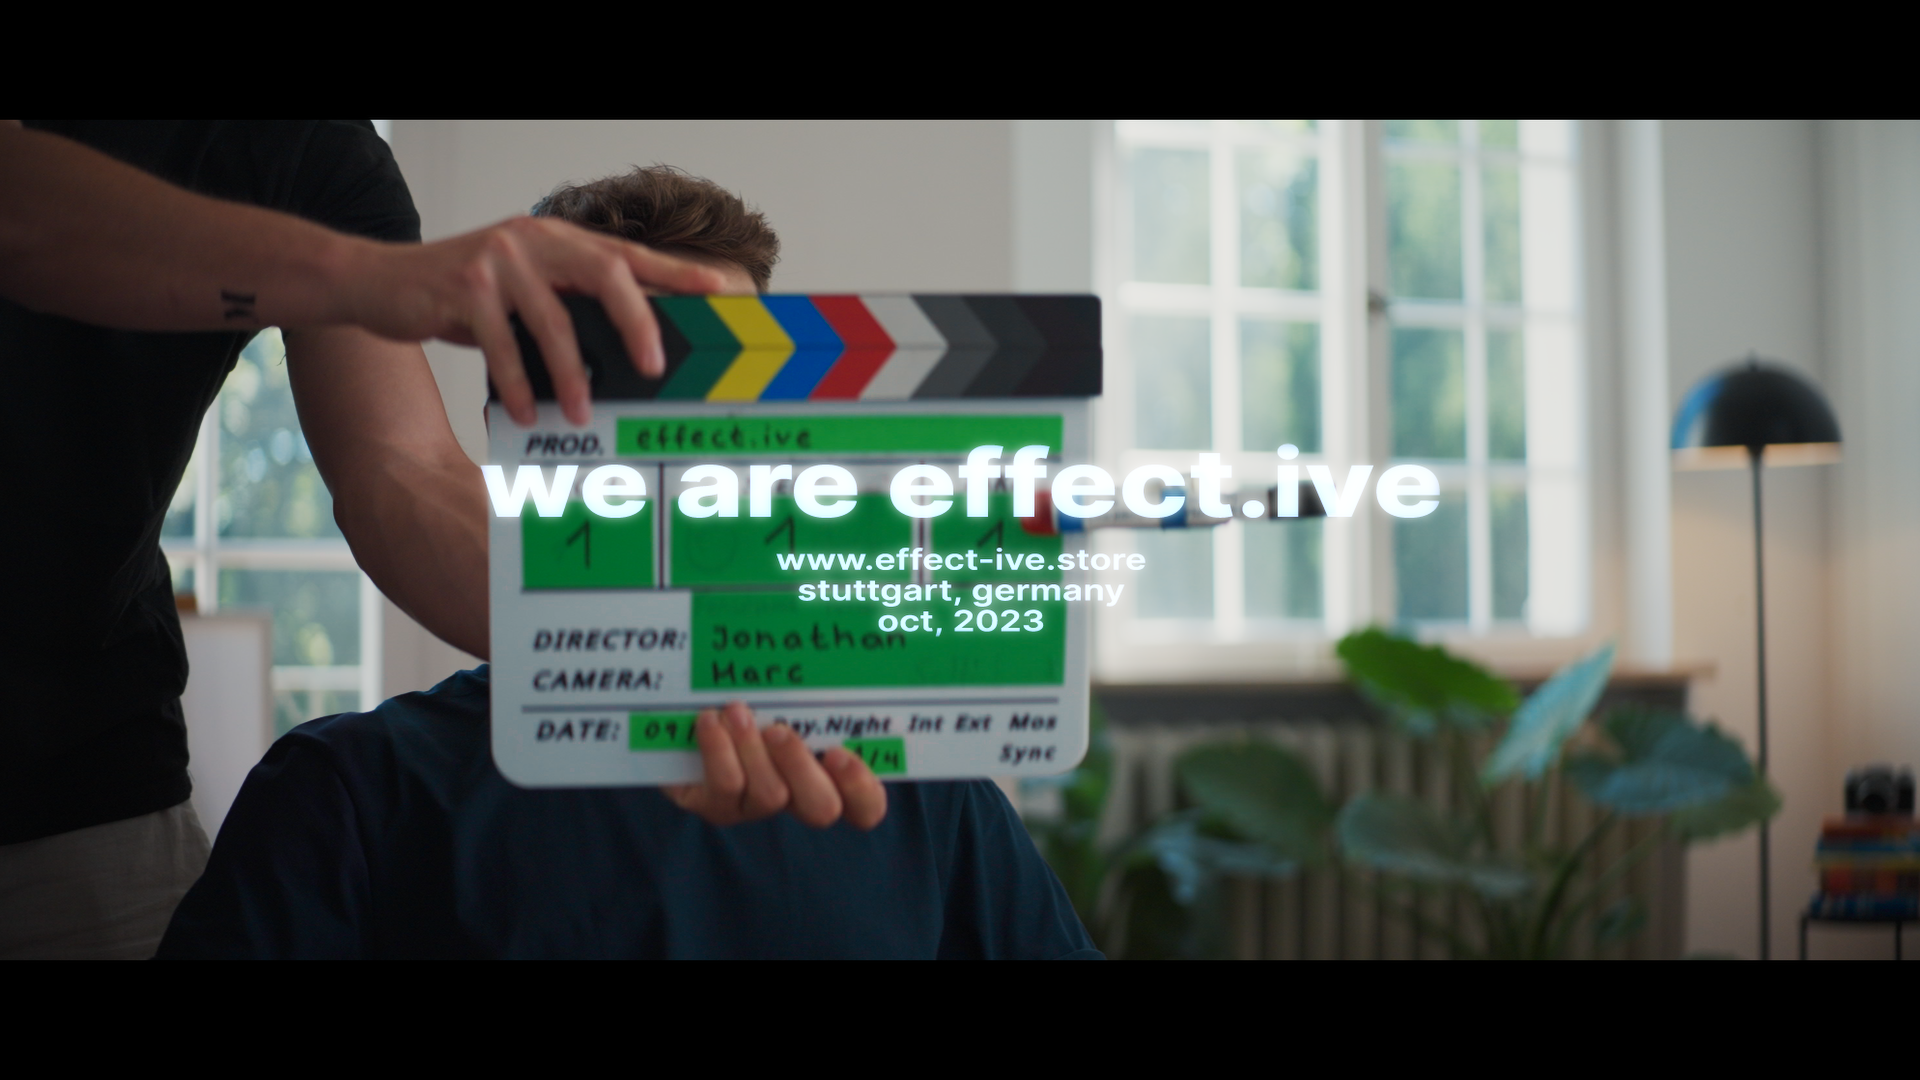 Load video: we are effect.ive